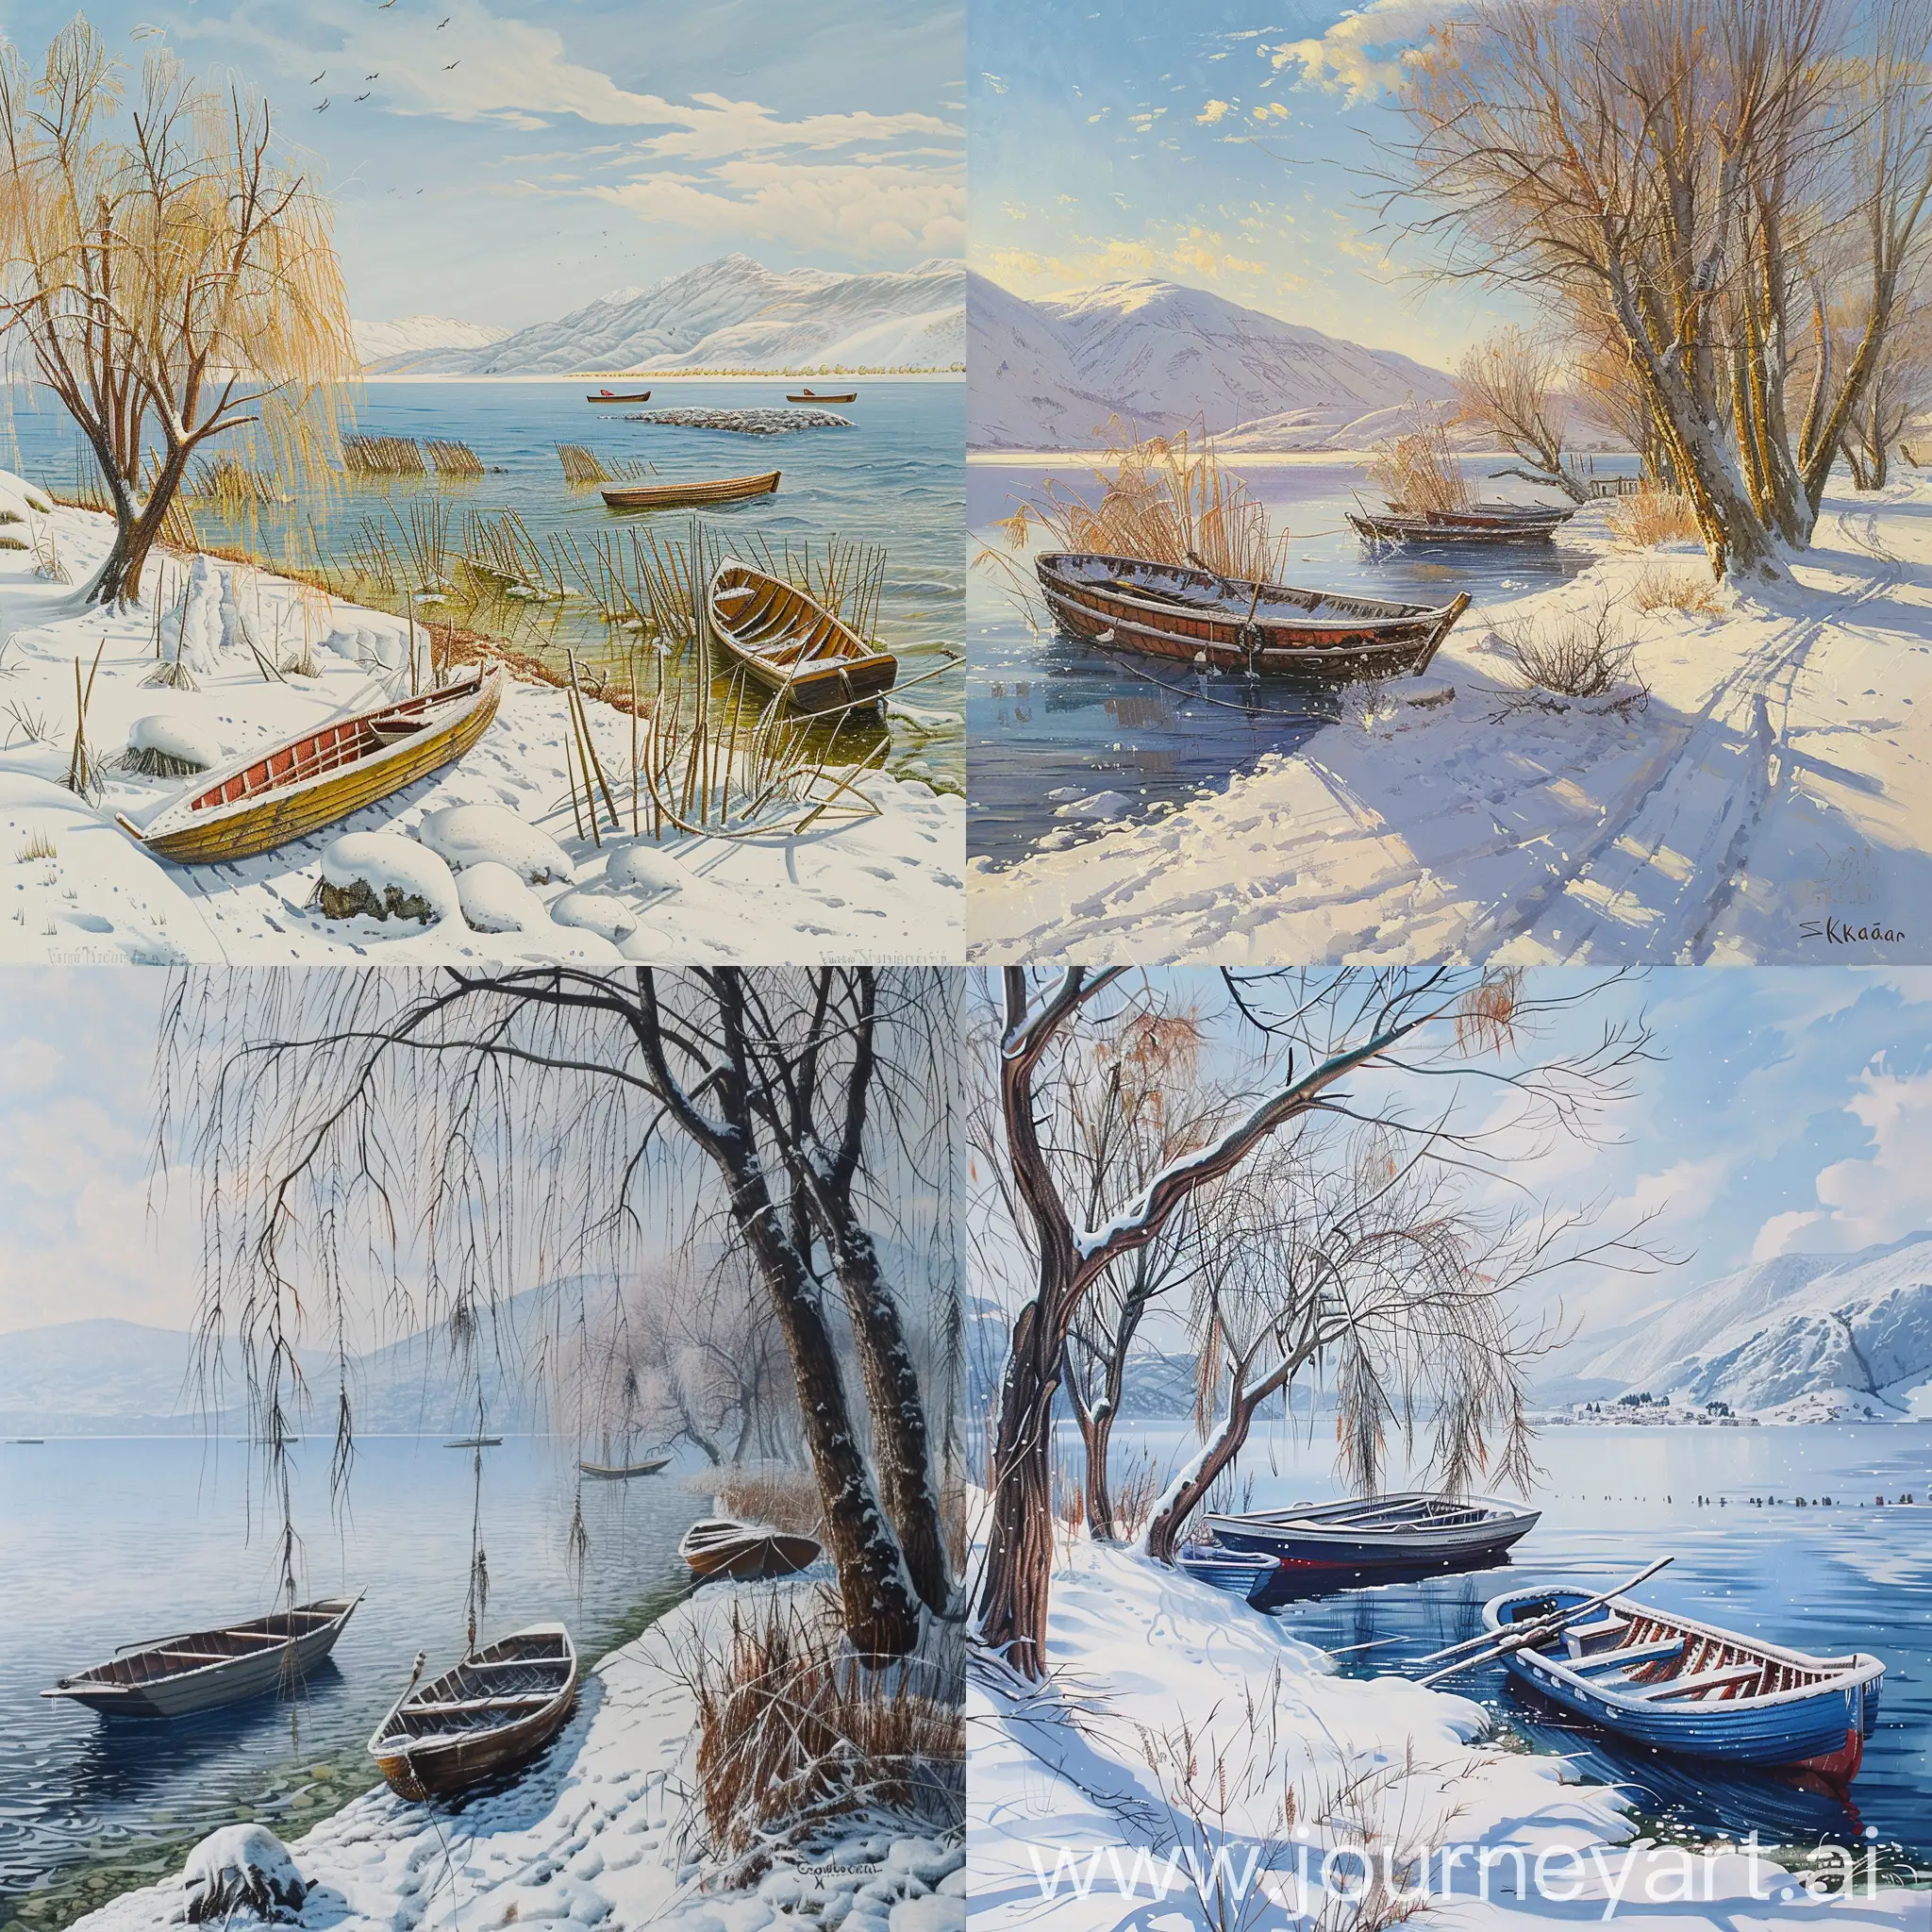 Tranquil-Winter-Scene-Willow-Trees-and-Boats-on-Lake-Skadar